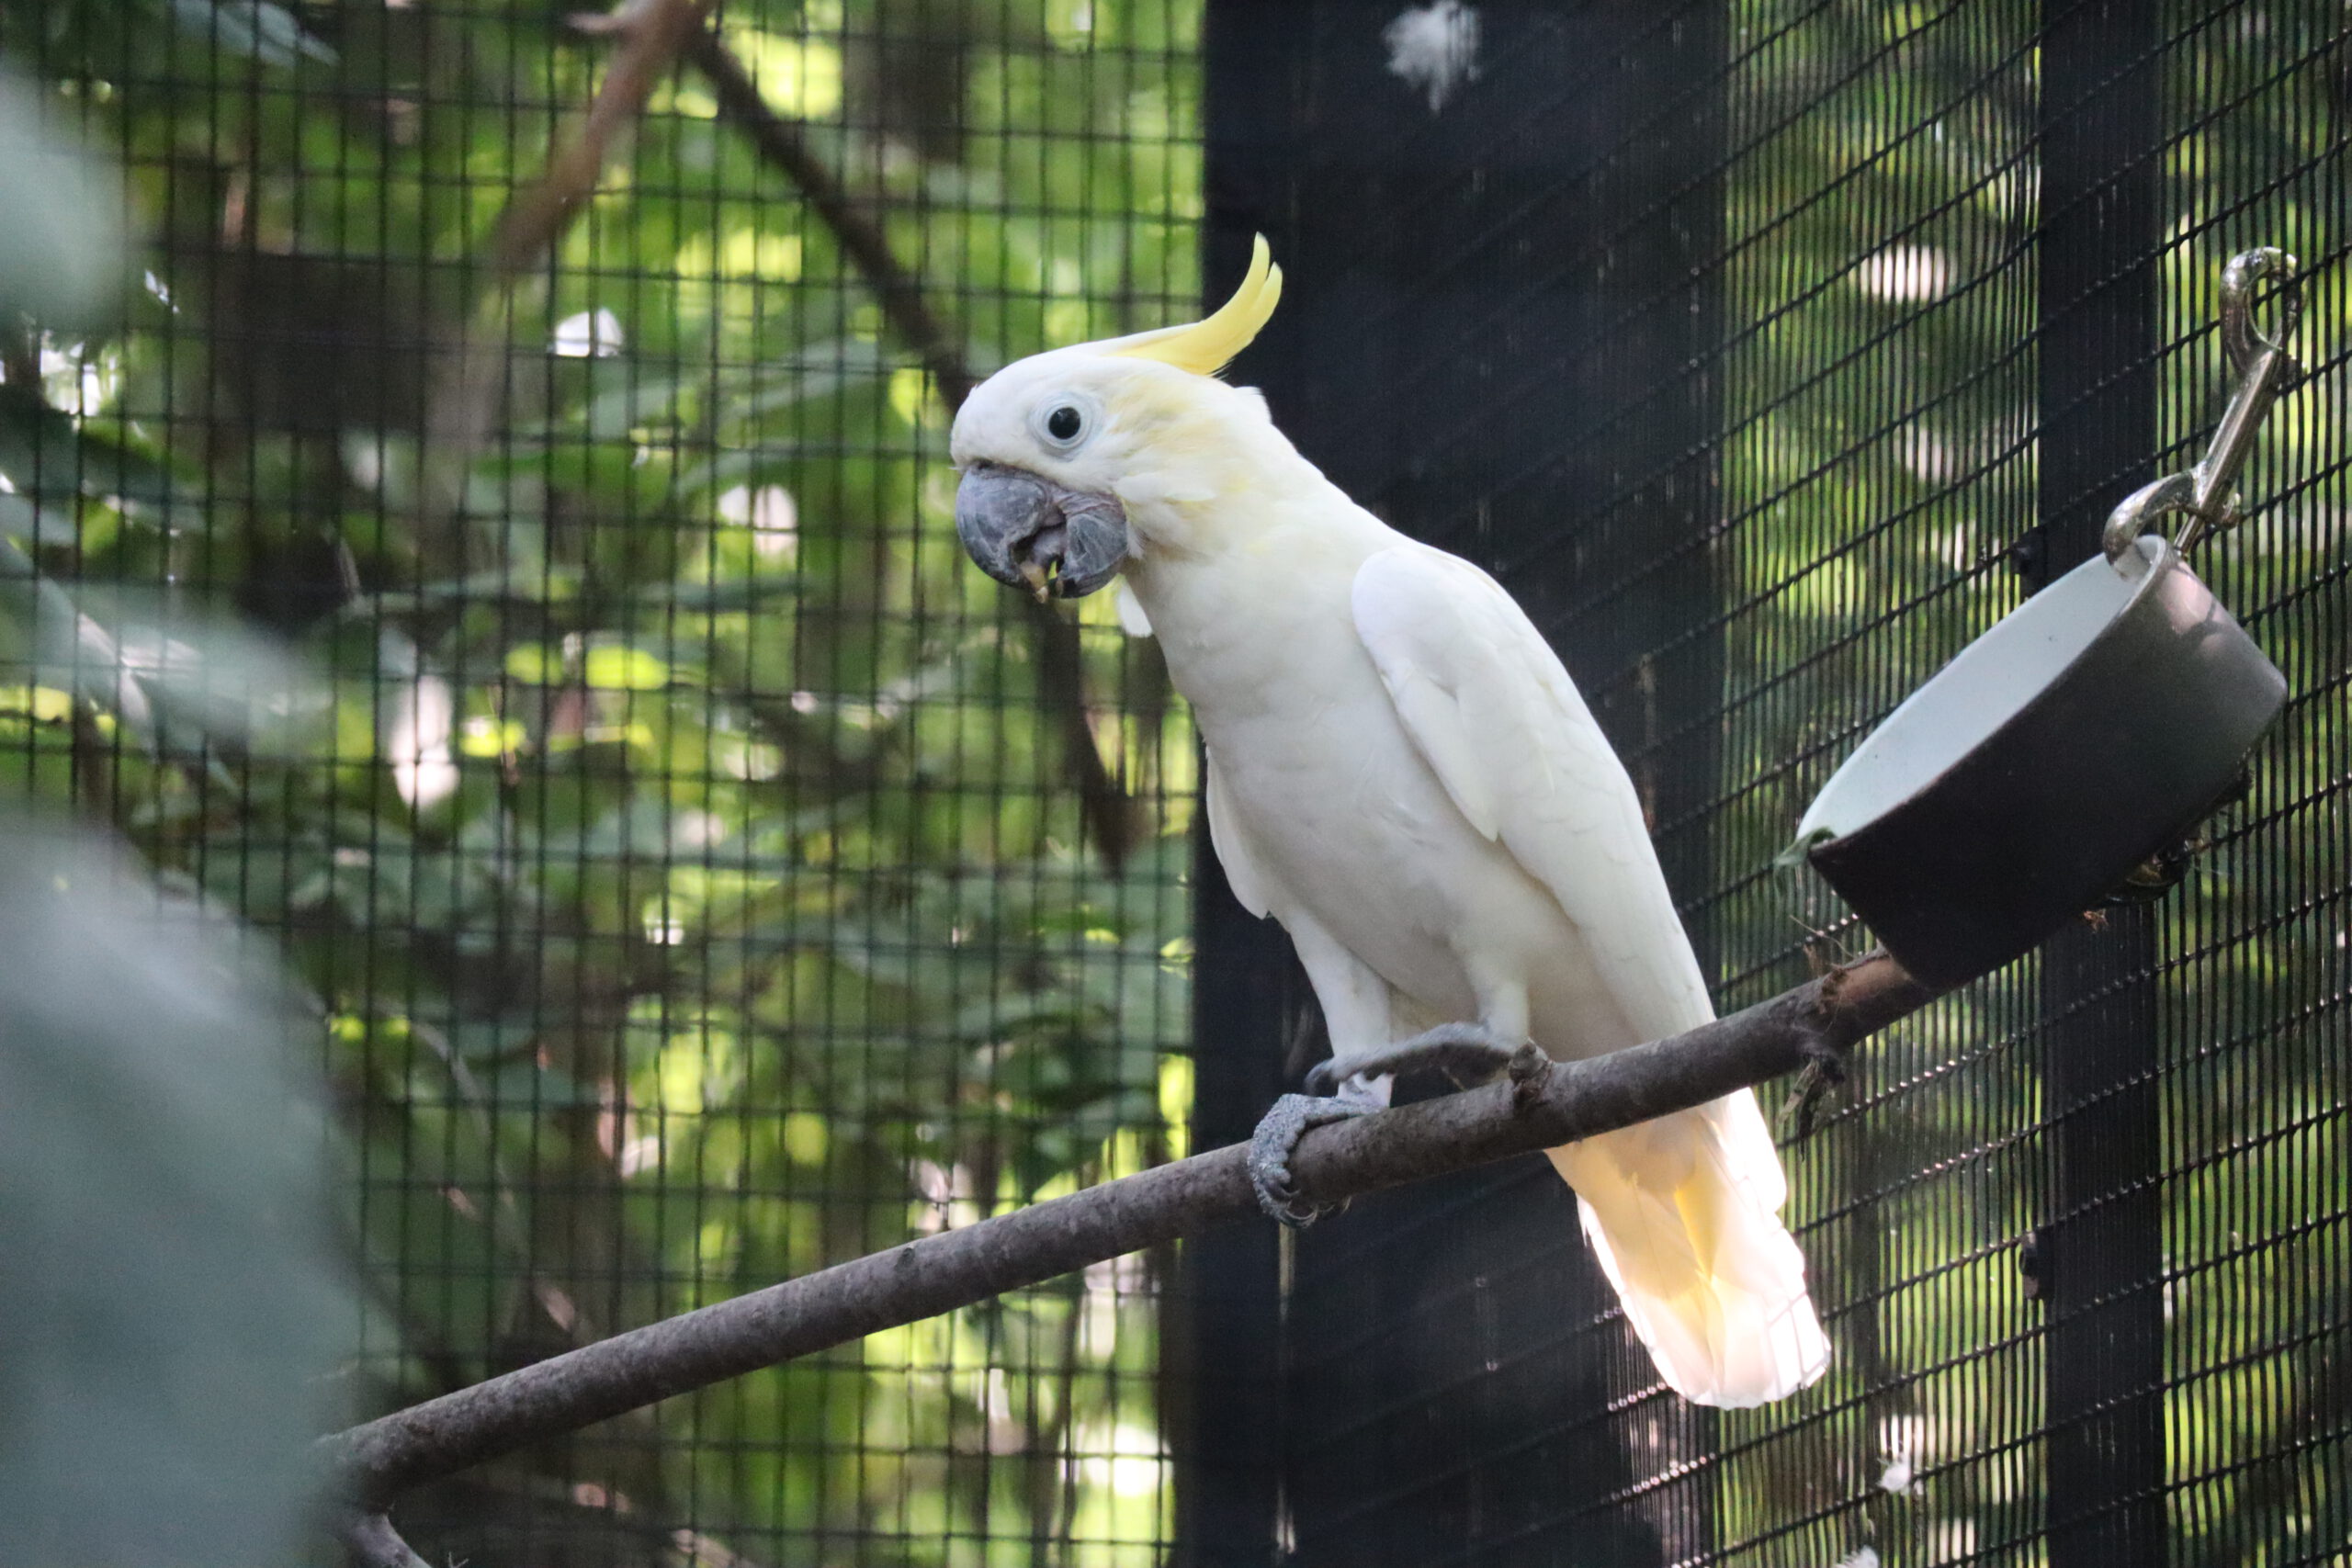 Lesser Sulpher-crested Cockatoo